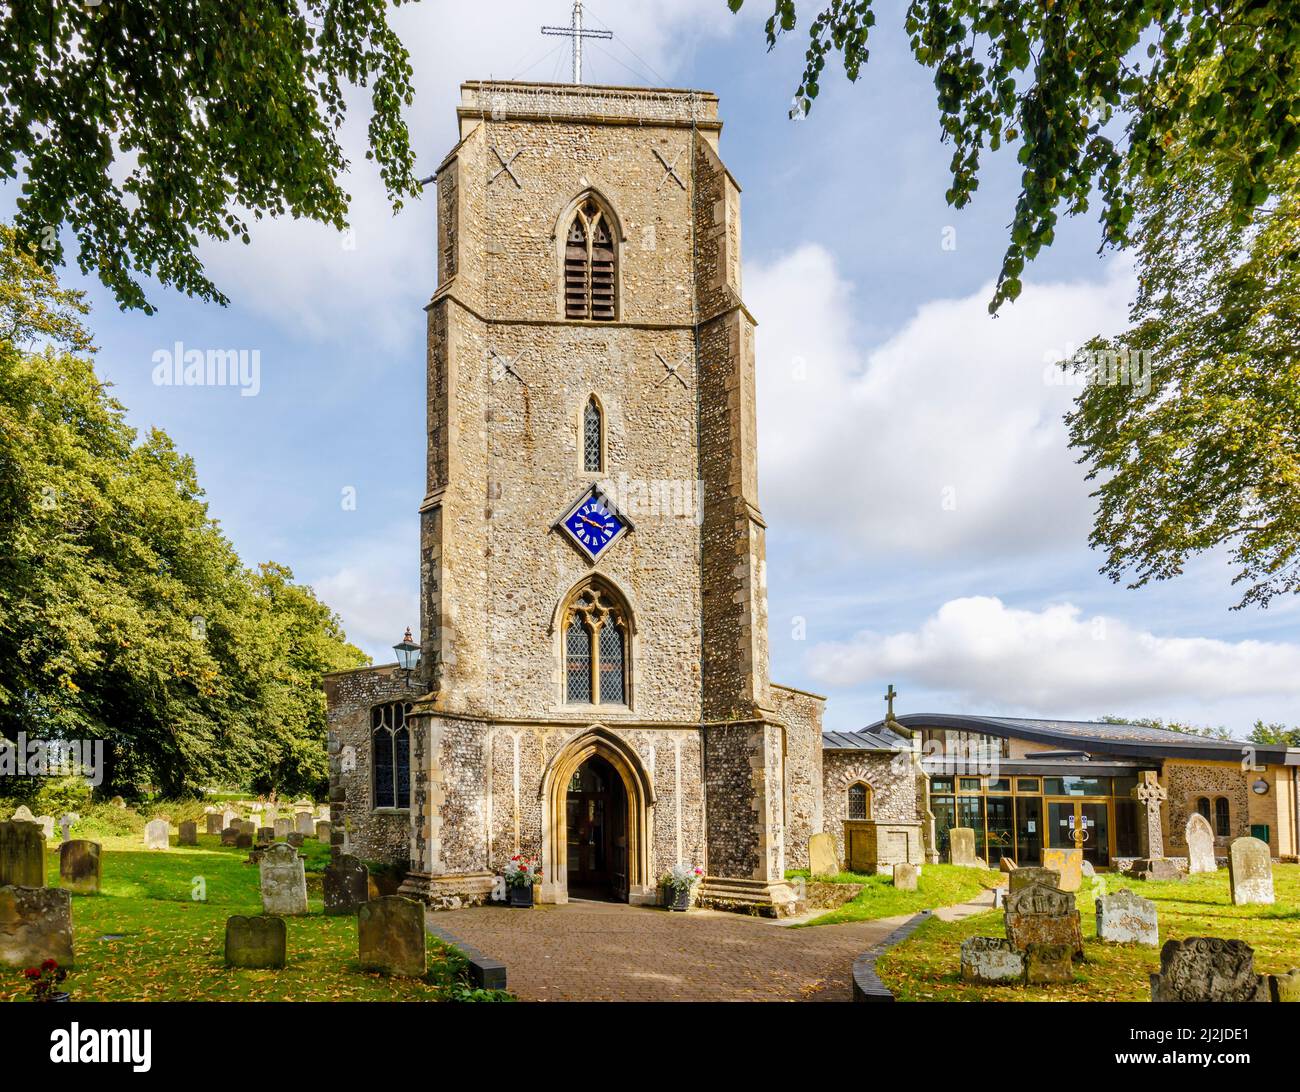 The flint and stone exterior of the parish Church of St Andrew the Apostle in Holt, a small historic Georgian market town in north Norfolk, England Stock Photo